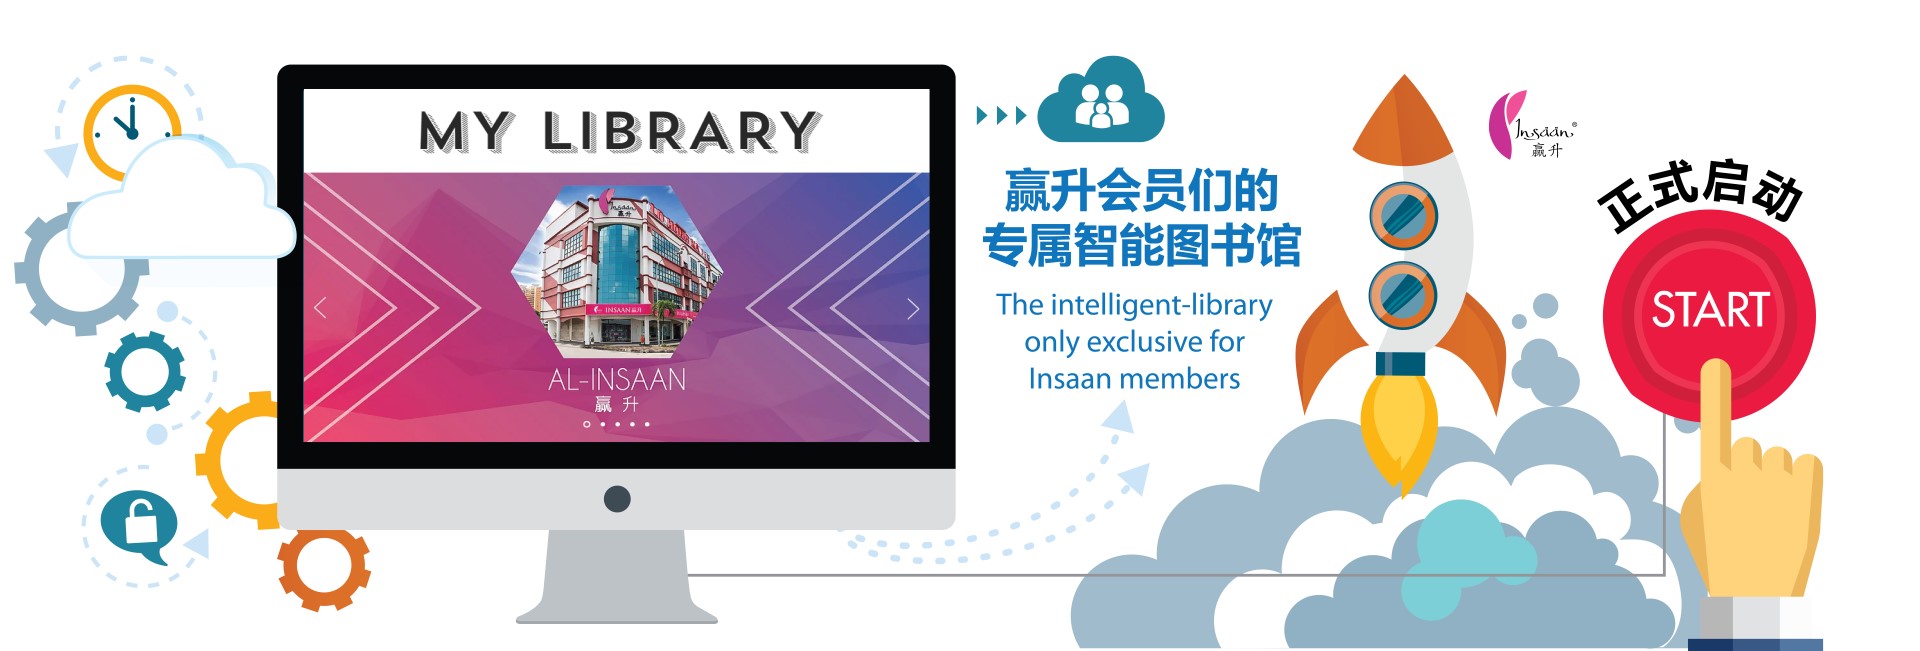 My Library Banner 01